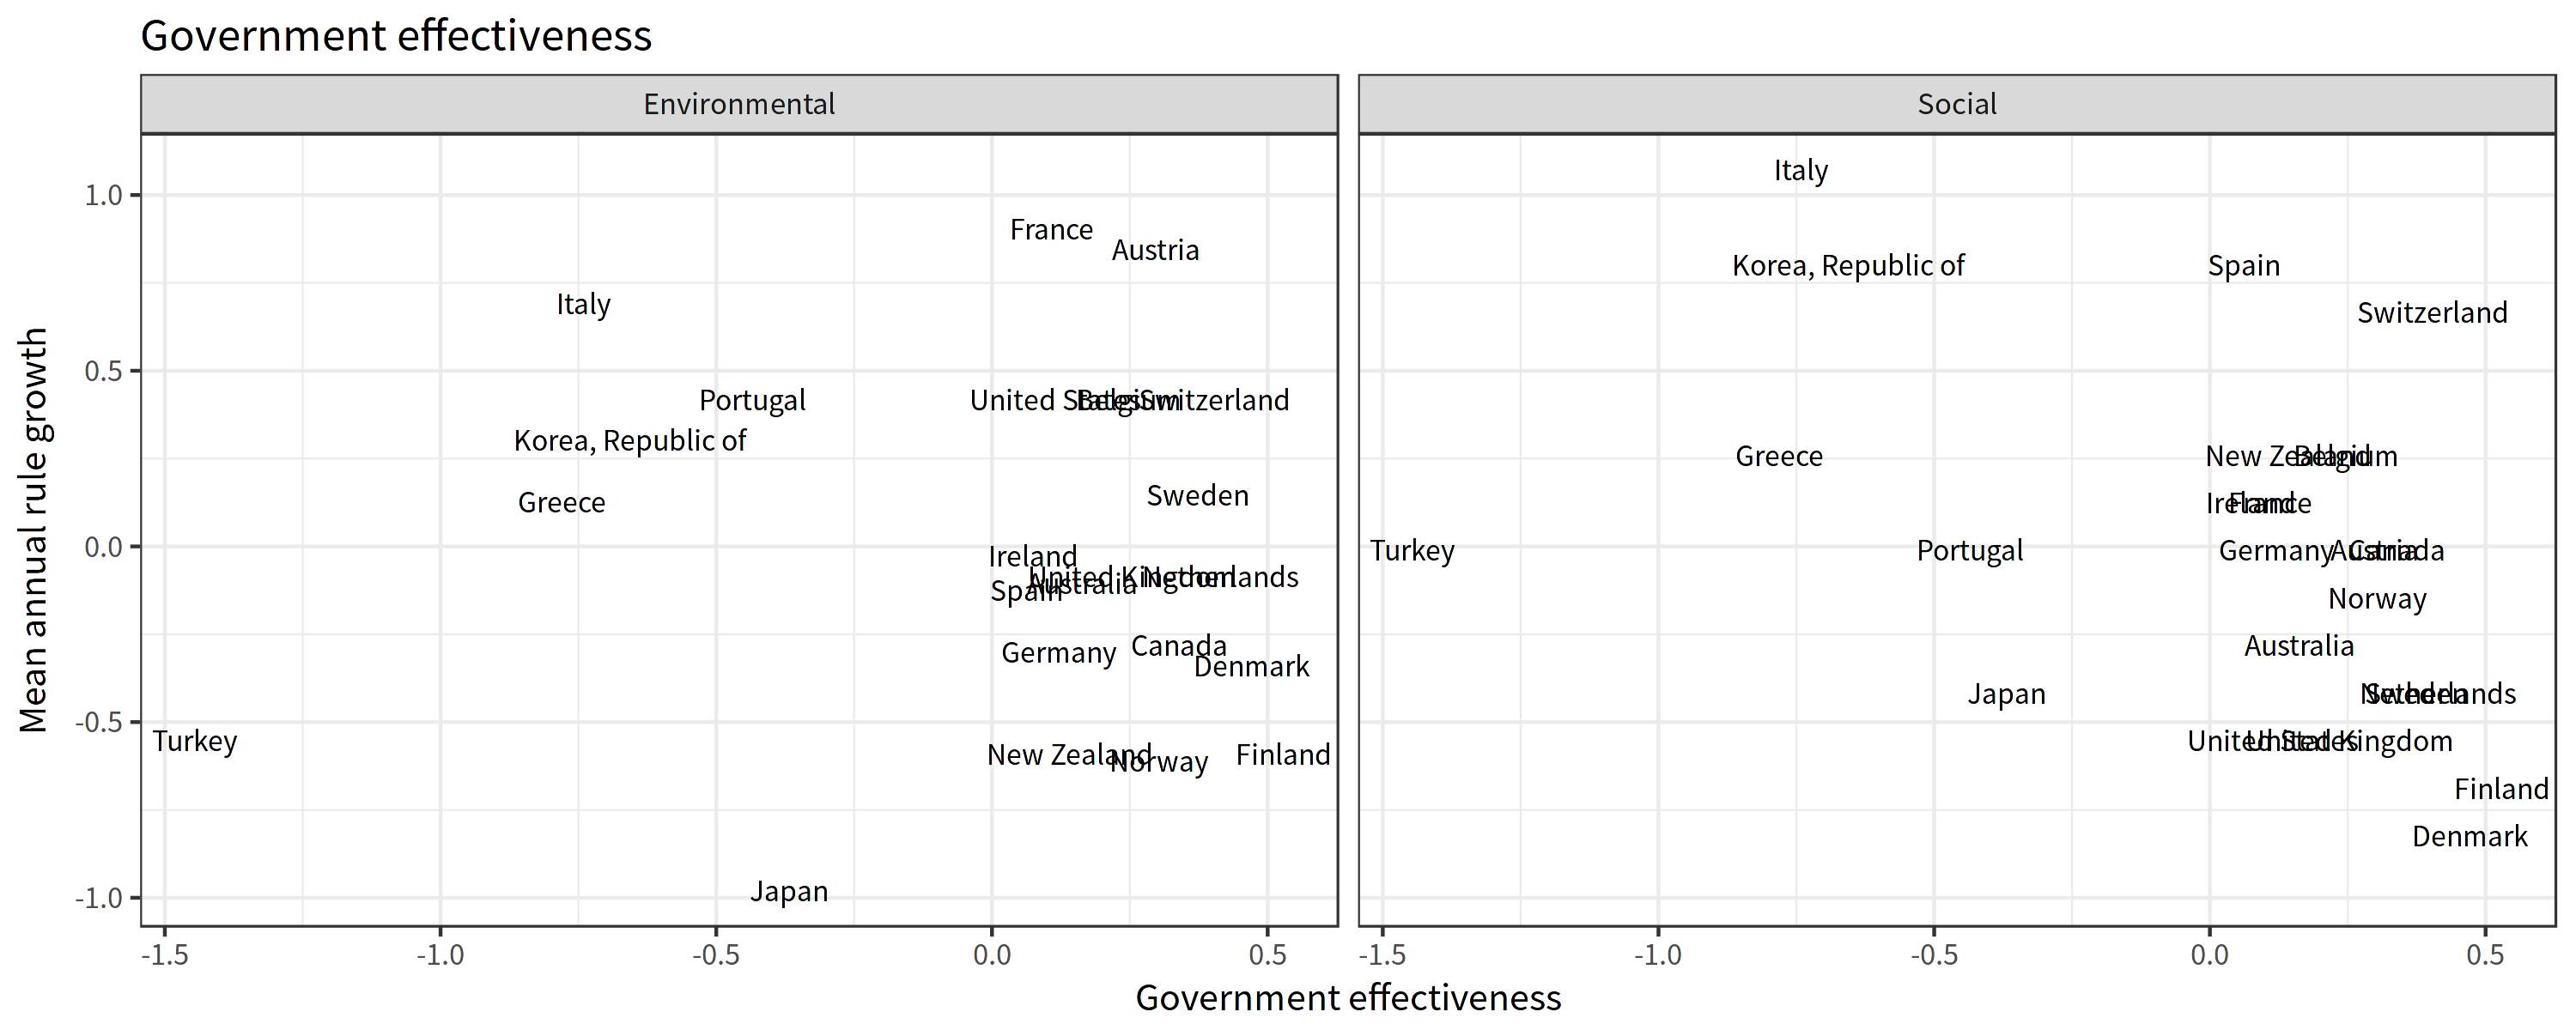 Government effectiveness against rule growth